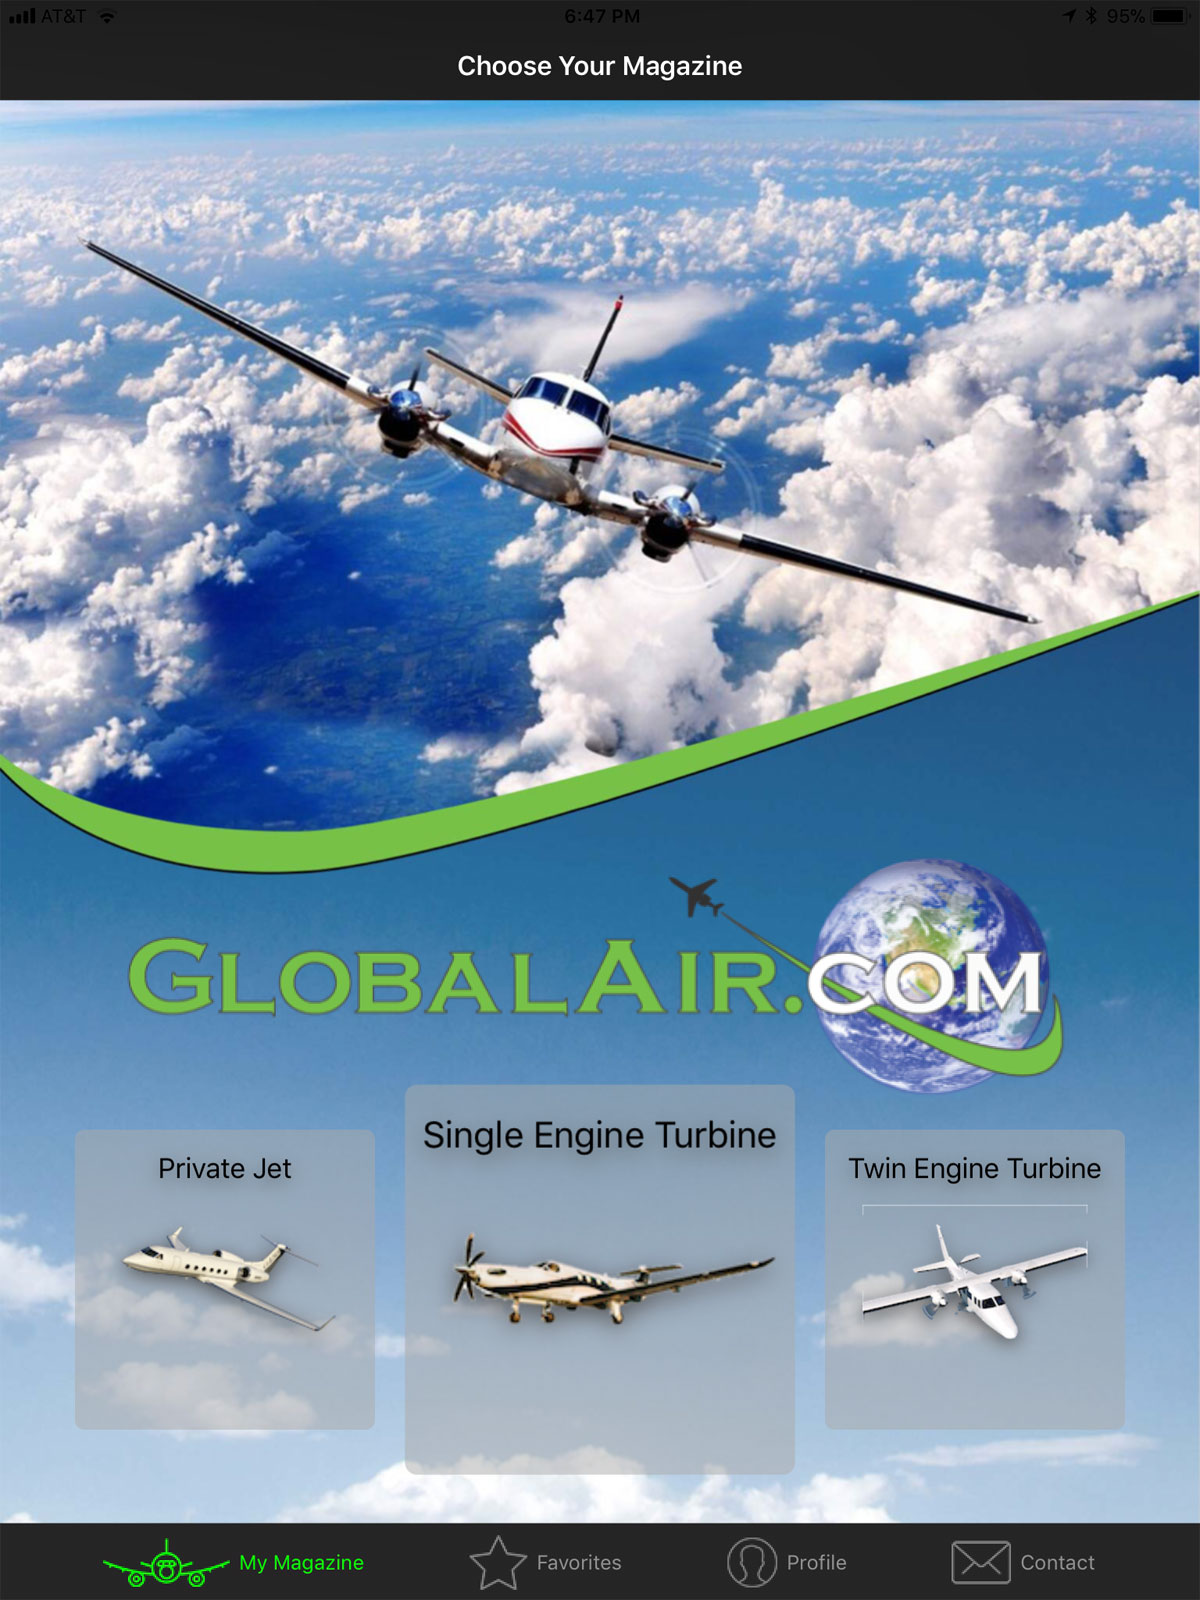 Globalair.com Aircraft Showcase App has 12 Magazines to choose from